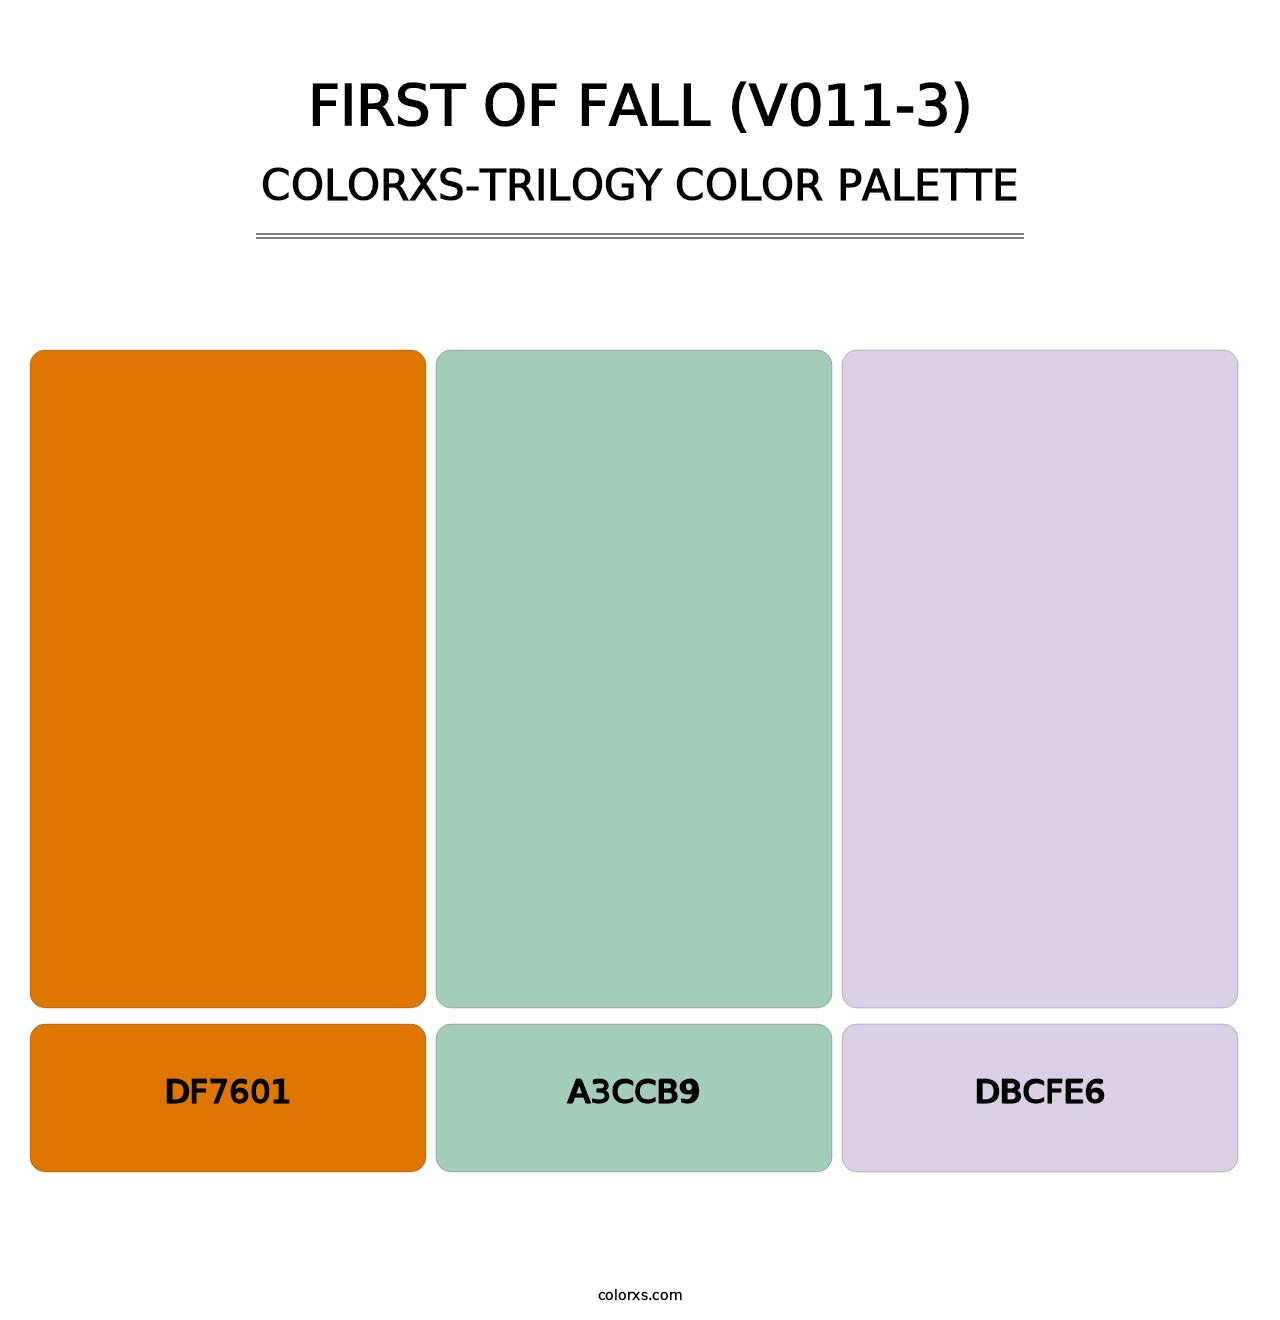 First of Fall (V011-3) - Colorxs Trilogy Palette